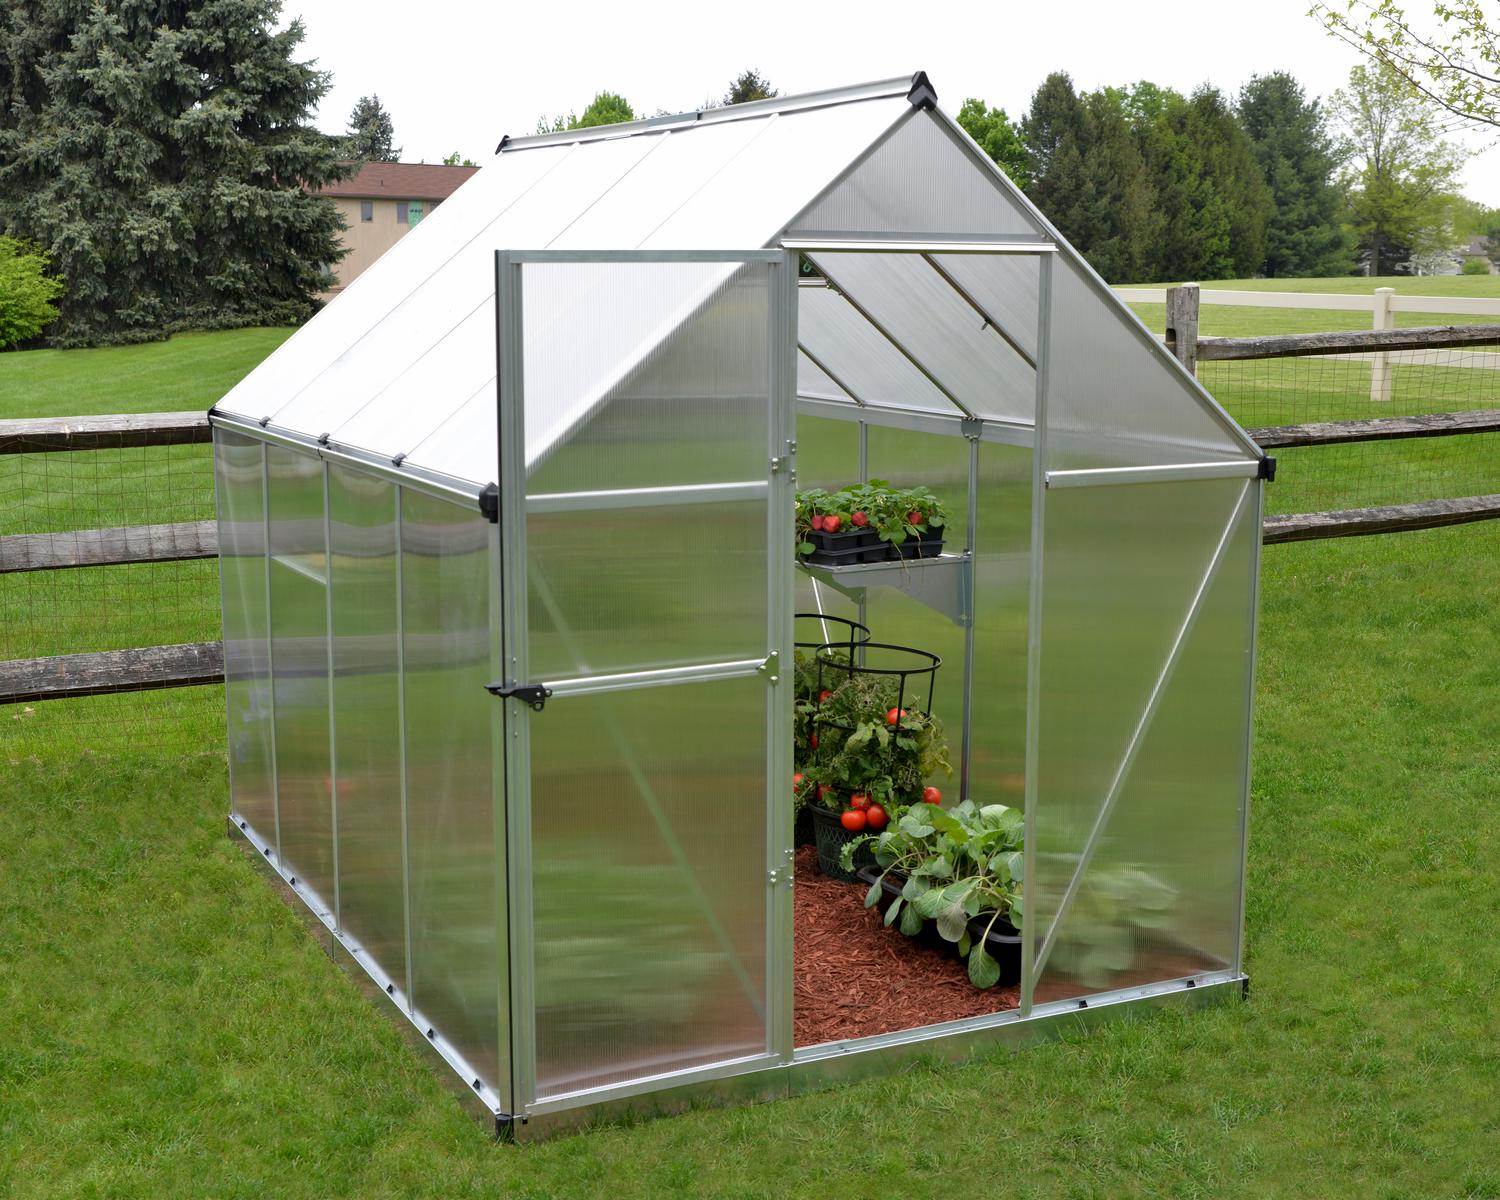 Mythos 6' x 8' Greenhouse Silver Structure & Twinwall Panels Outside on a Lawn